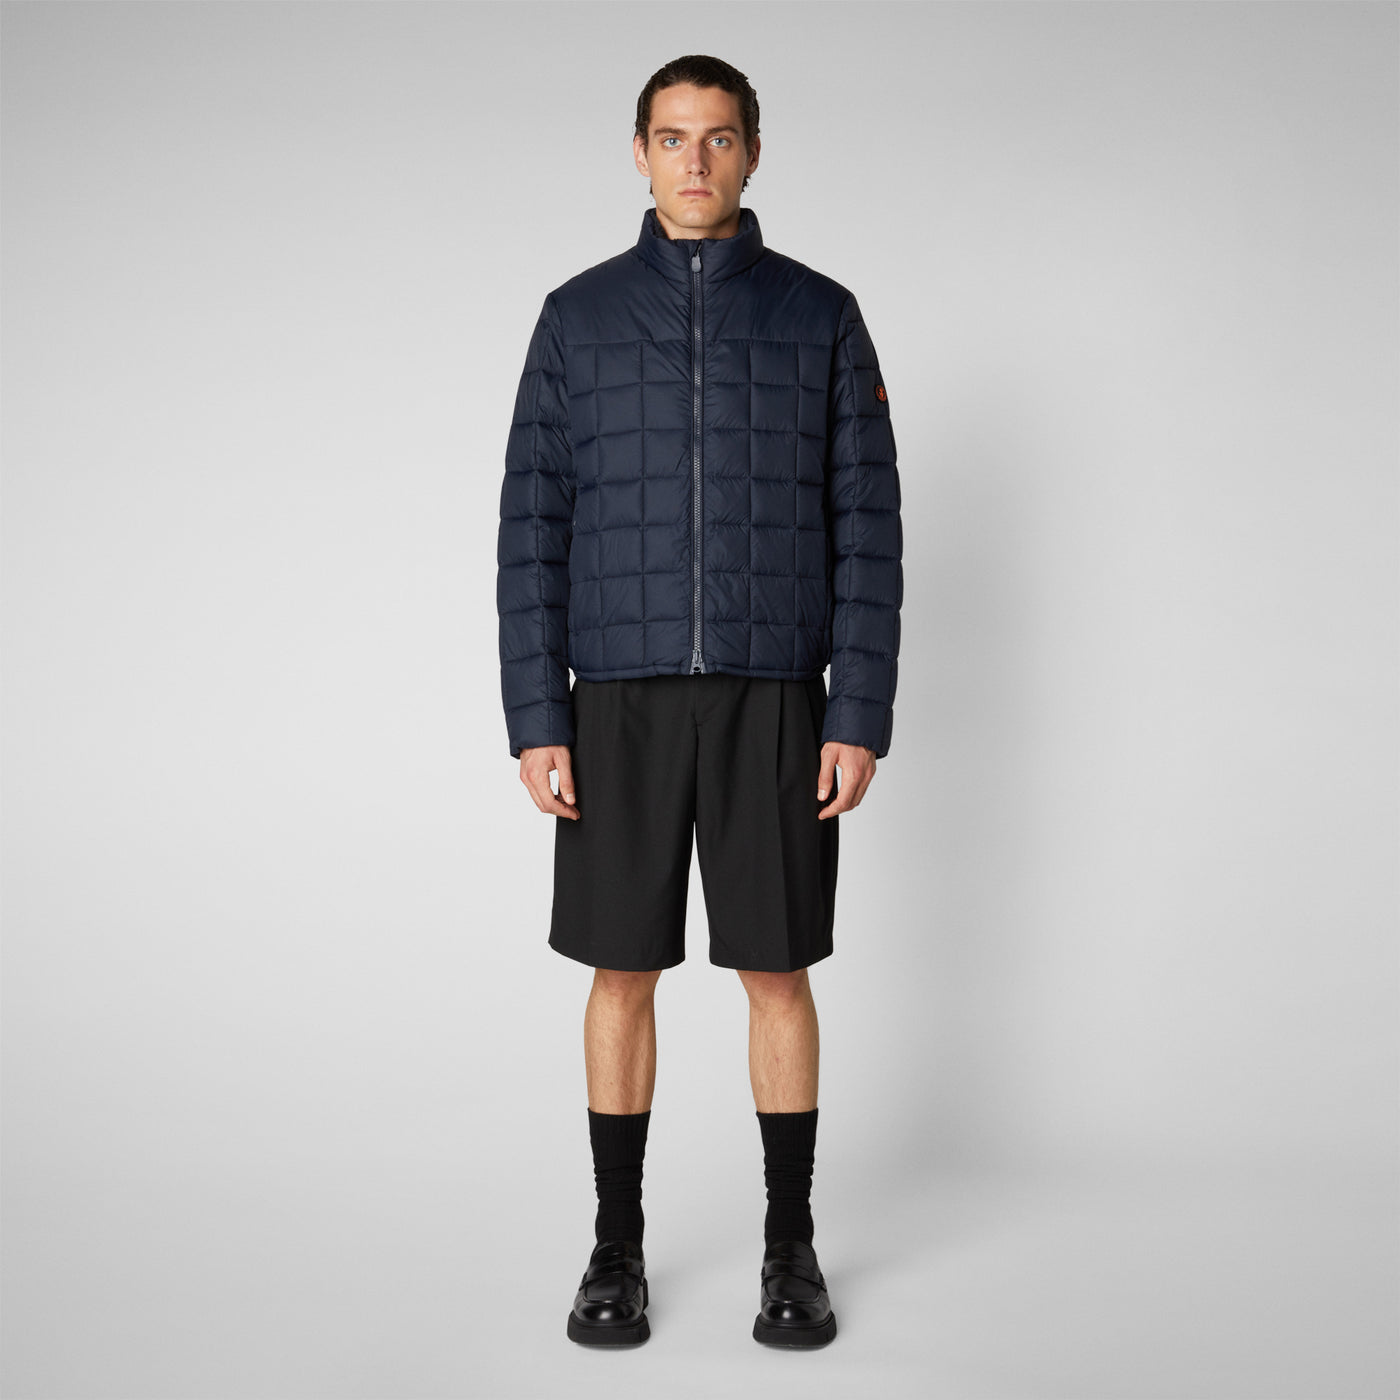 Men's Stalis Puffer Jacket with Faux Fur Lining in Blue Black